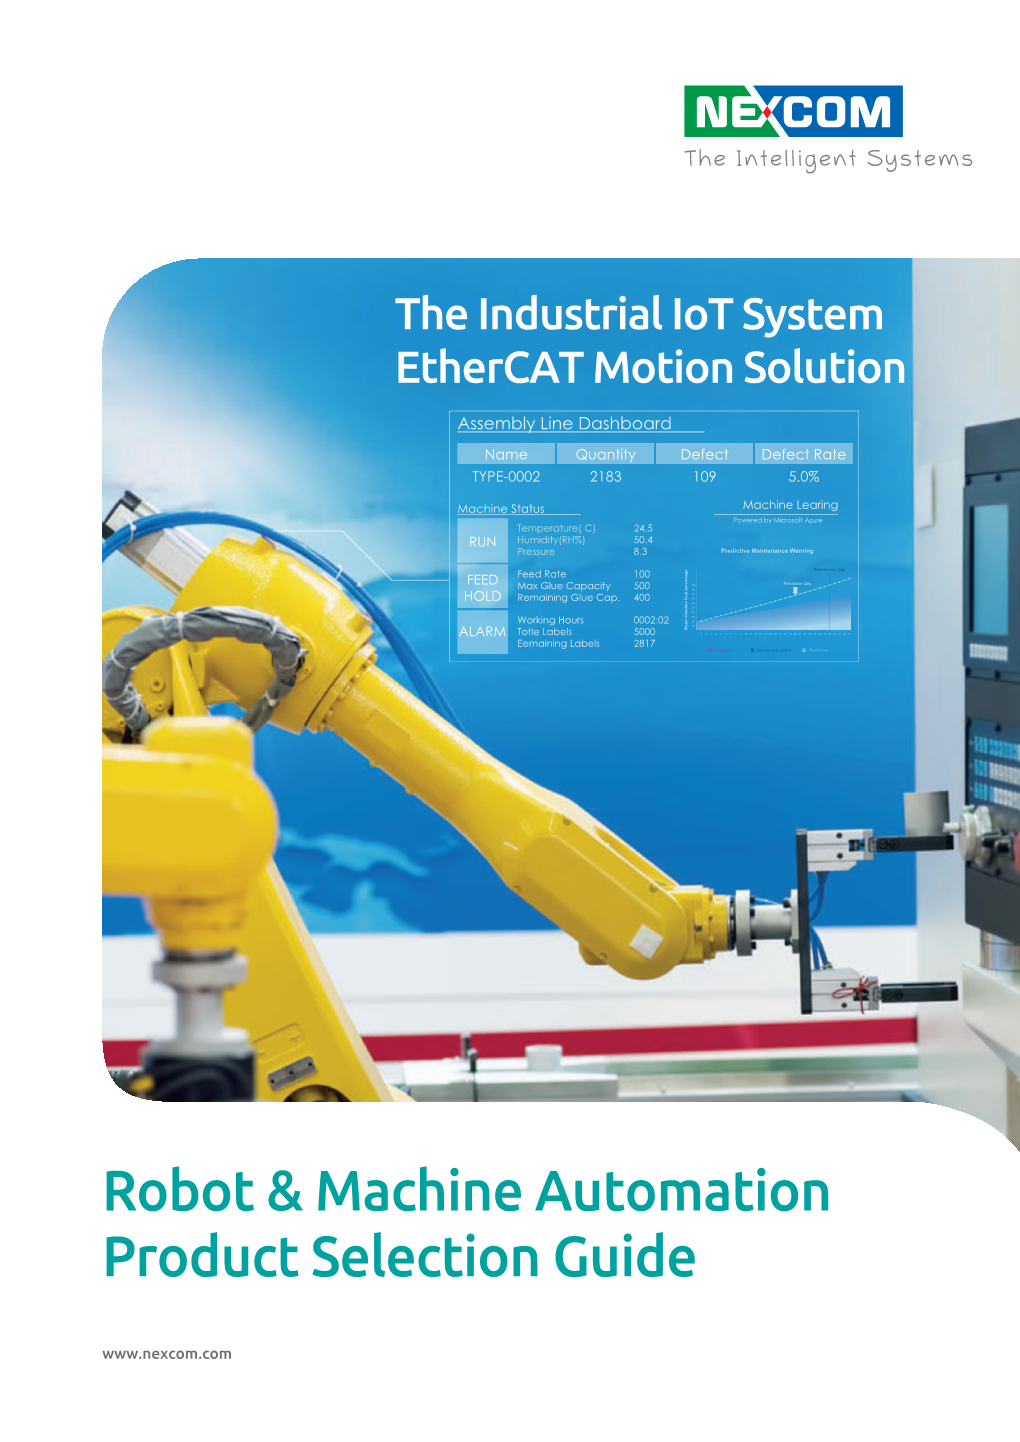 Robot & Machine Automation Product Selection Guide